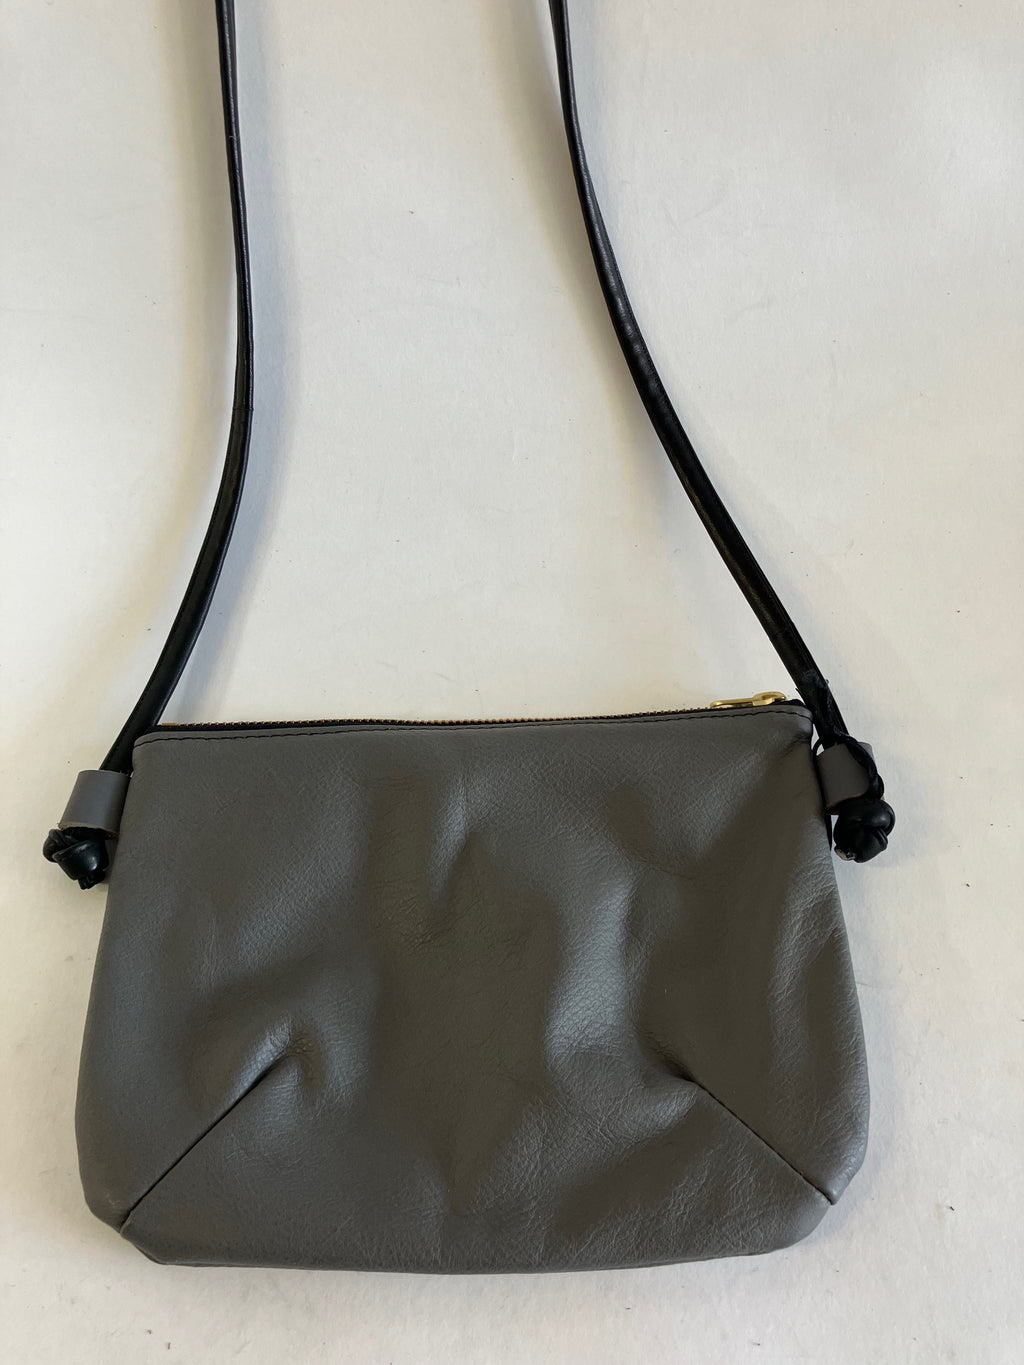 SAMPLE. ONE OF A KIND Minimalist small shoulder pouch in leather